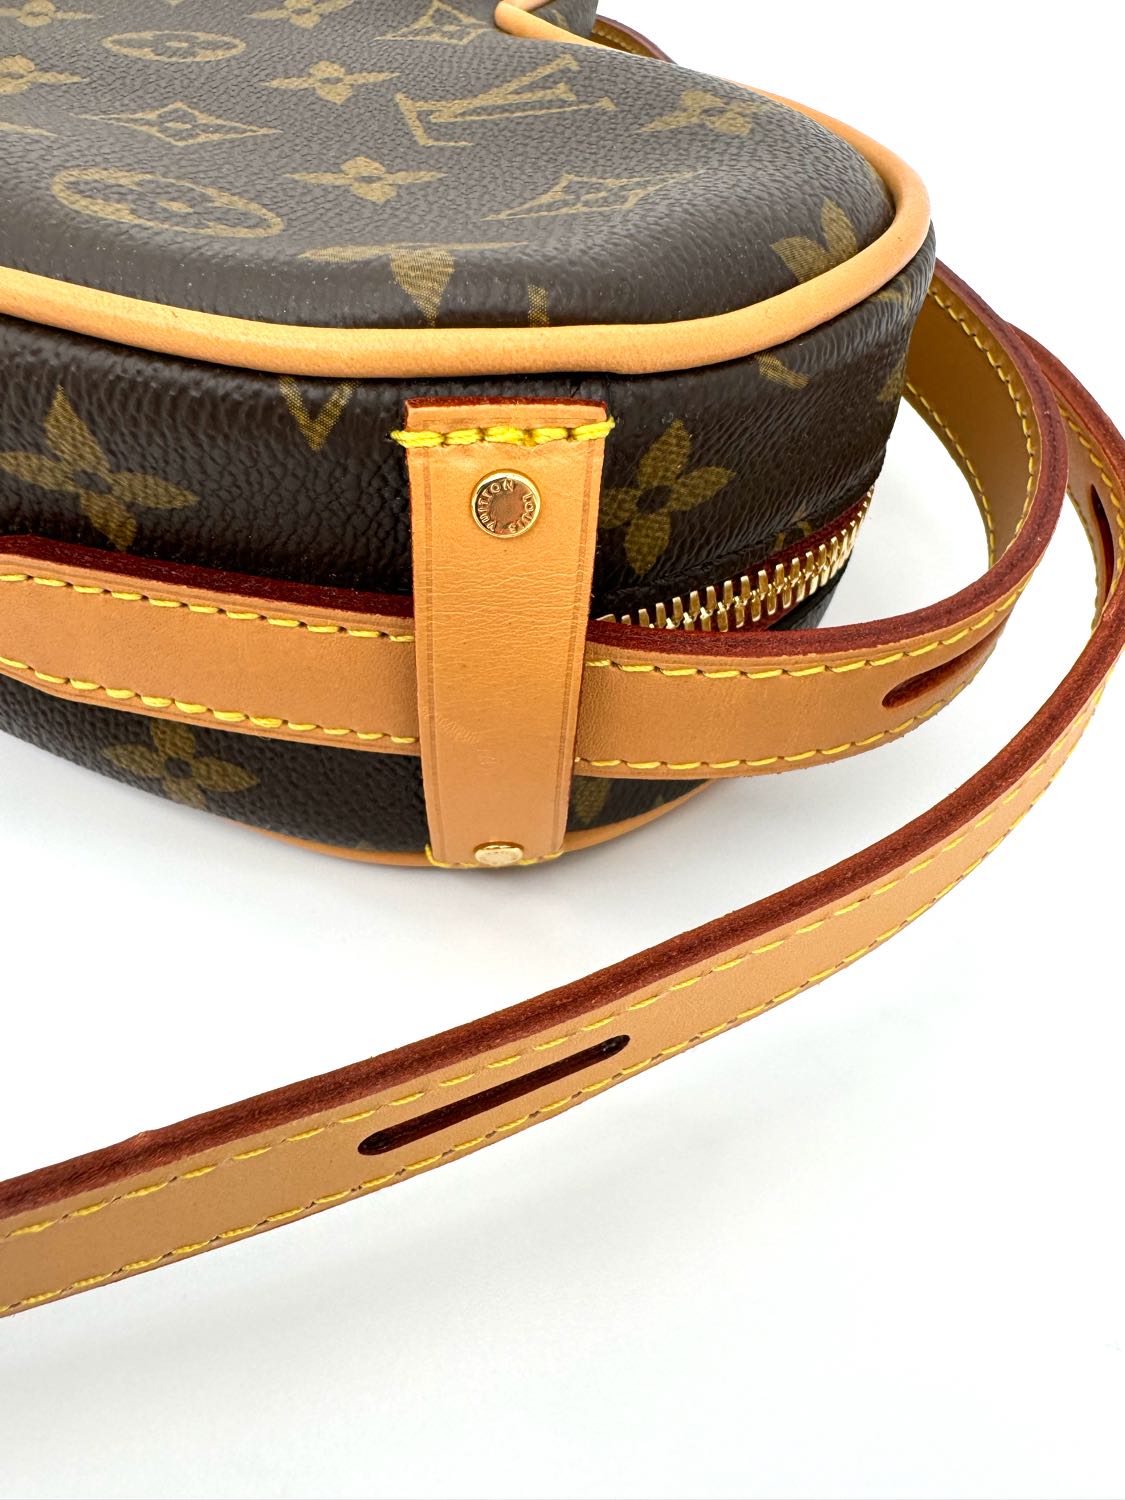 Louis Vuitton Limited Addition Monogram Game On Coeur Heart Bag